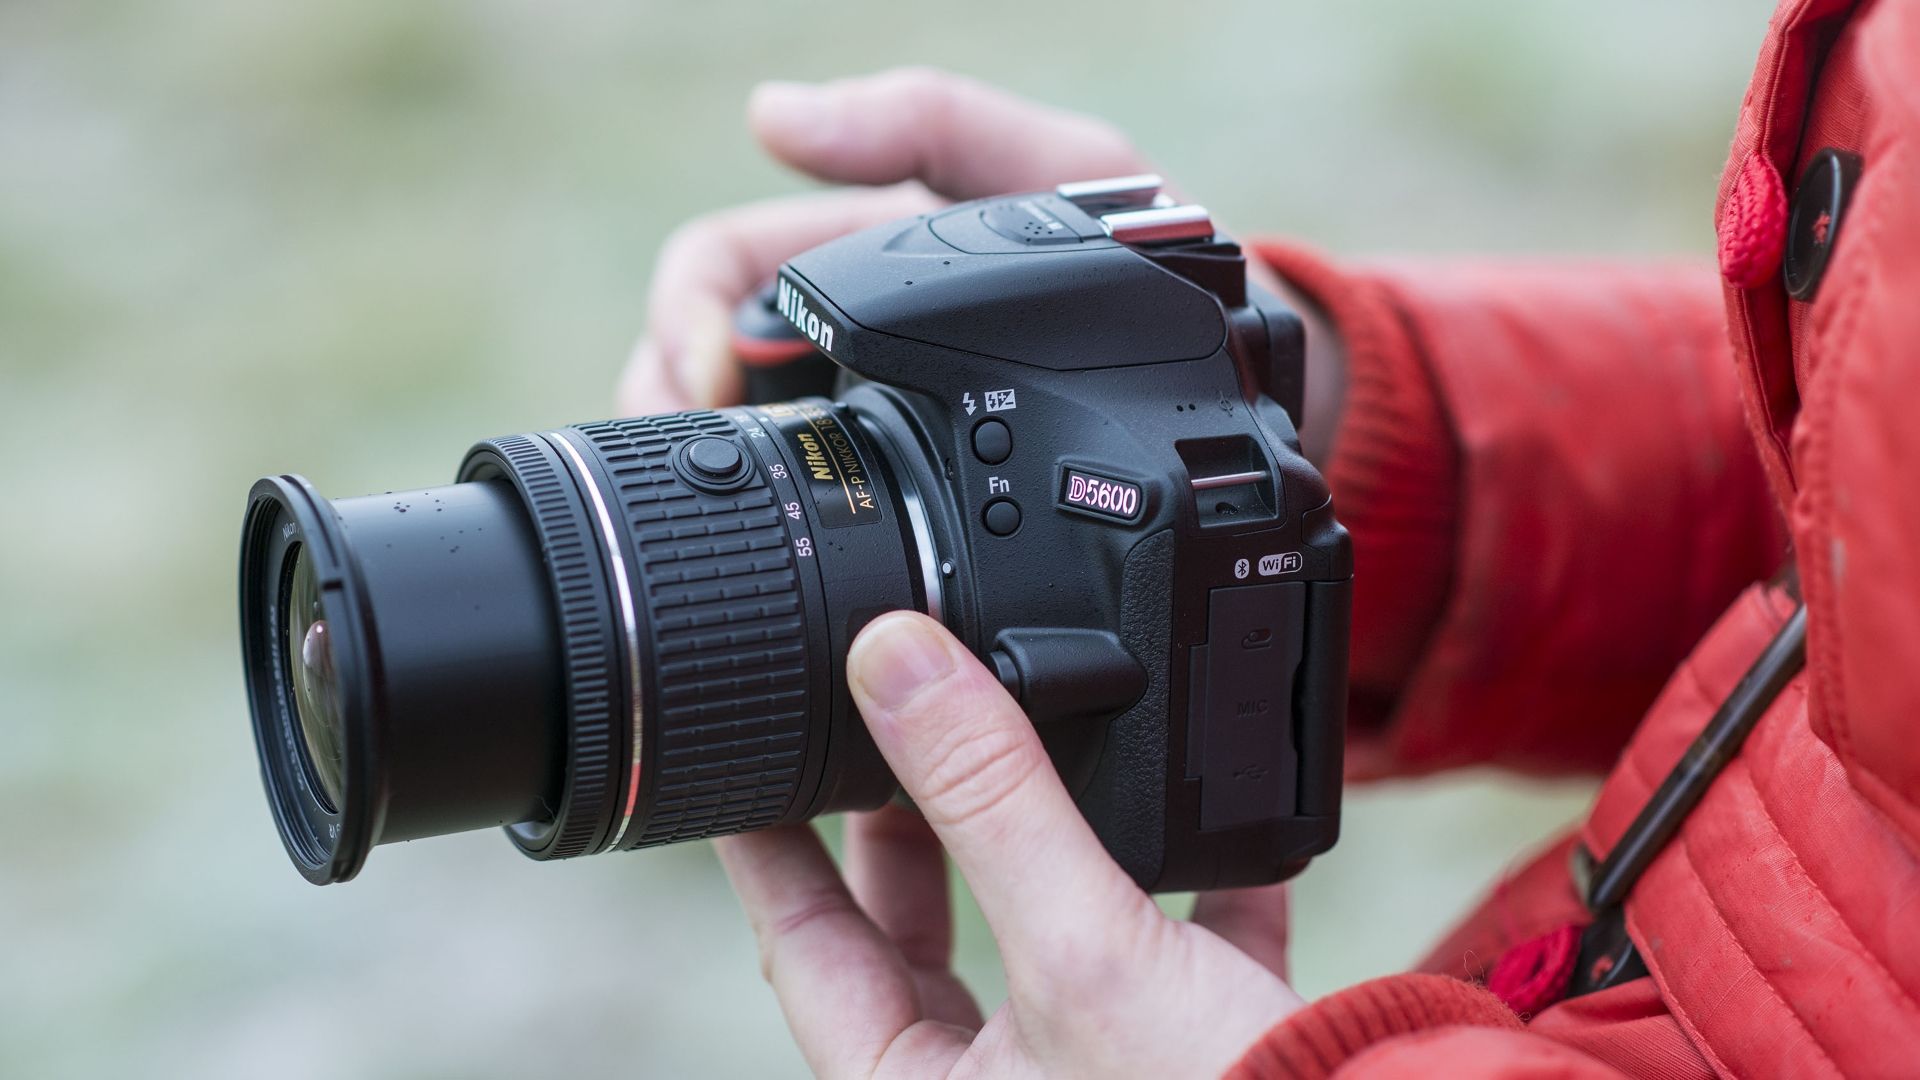 The best Nikon D5600 deals in 2018: take better photo with this top beginner DSLR